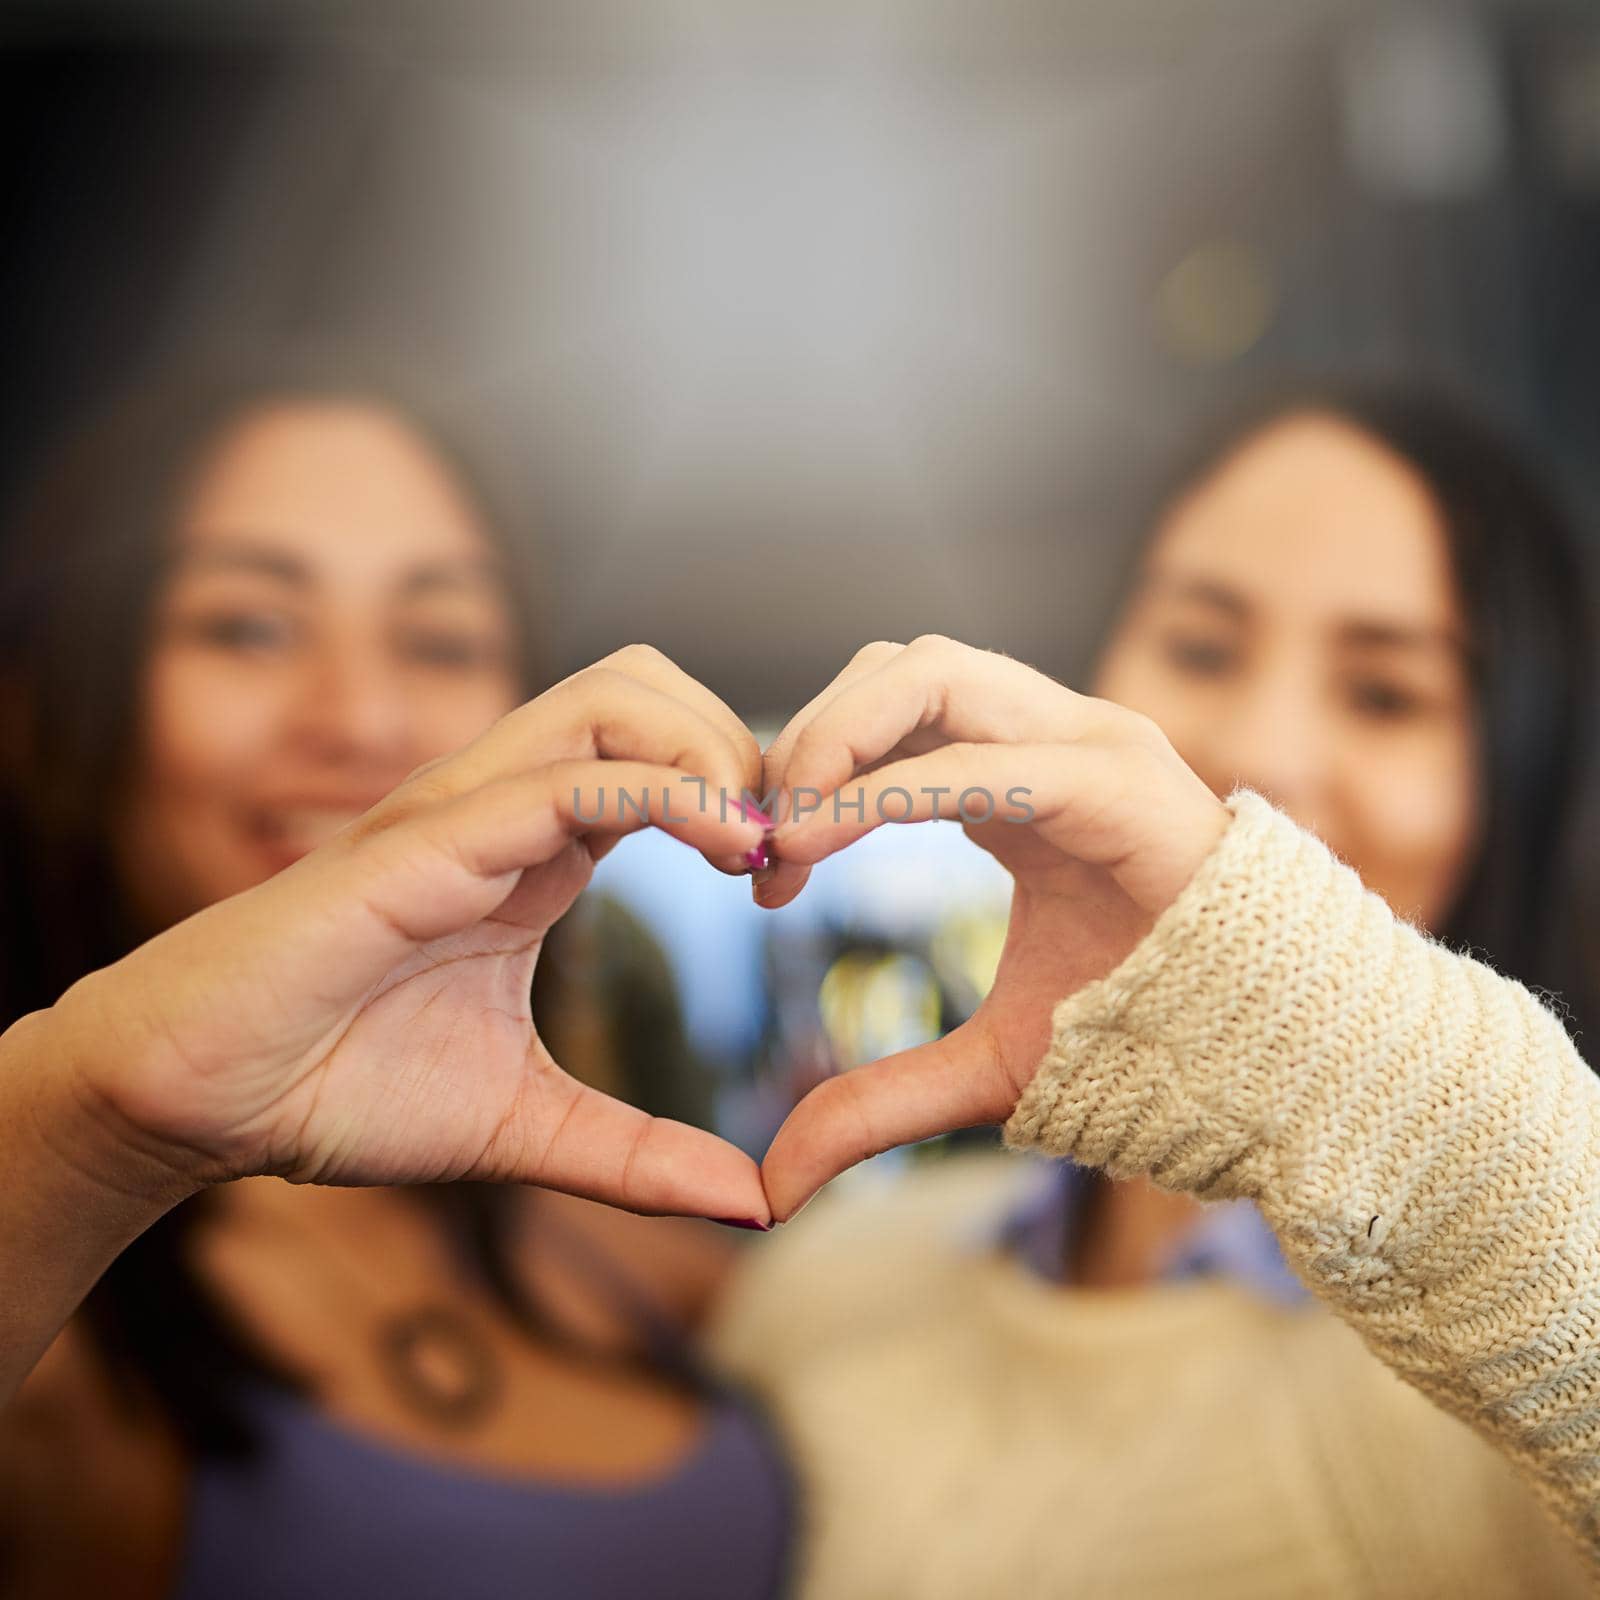 Portrait of two young friends making a heart shape with their hands.